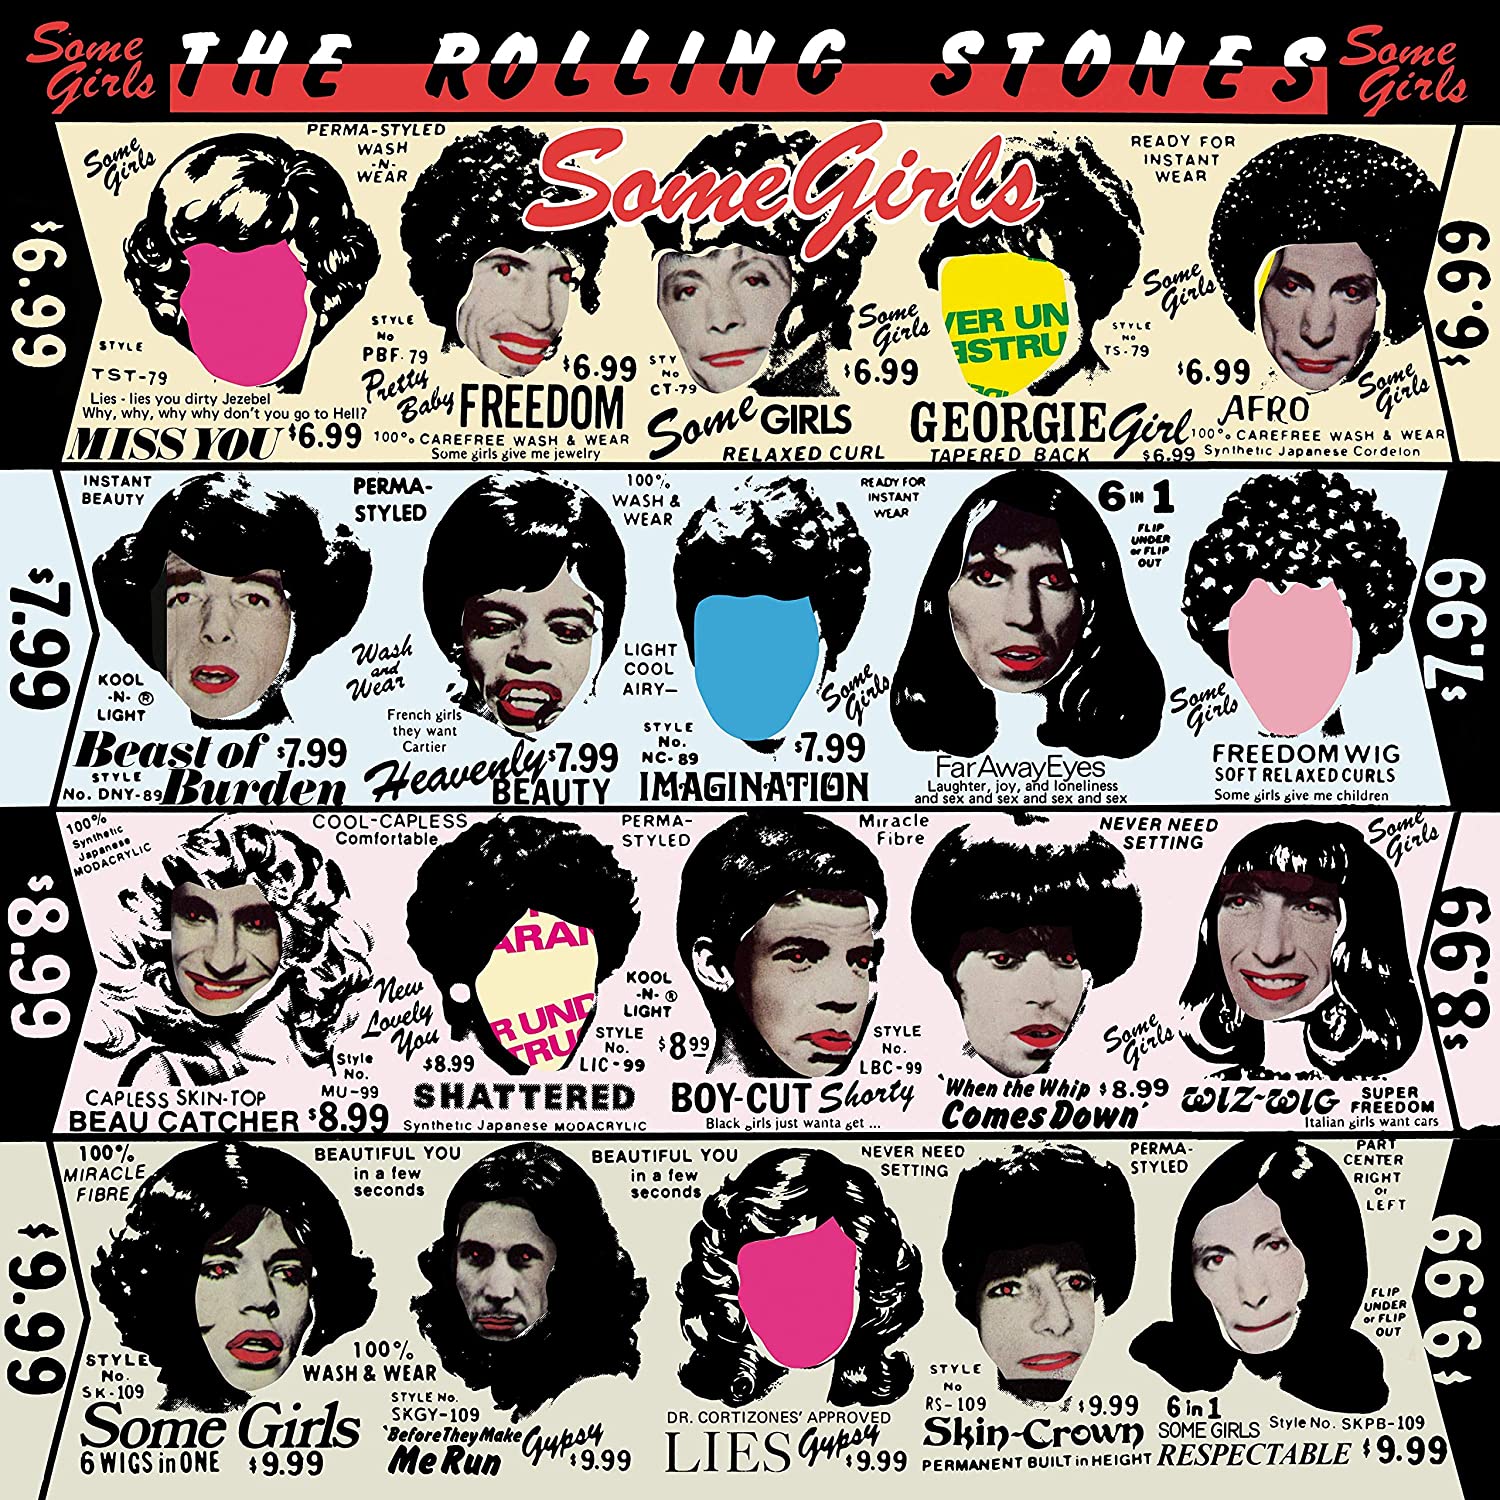 Rolling Stones "Some Girls" LP